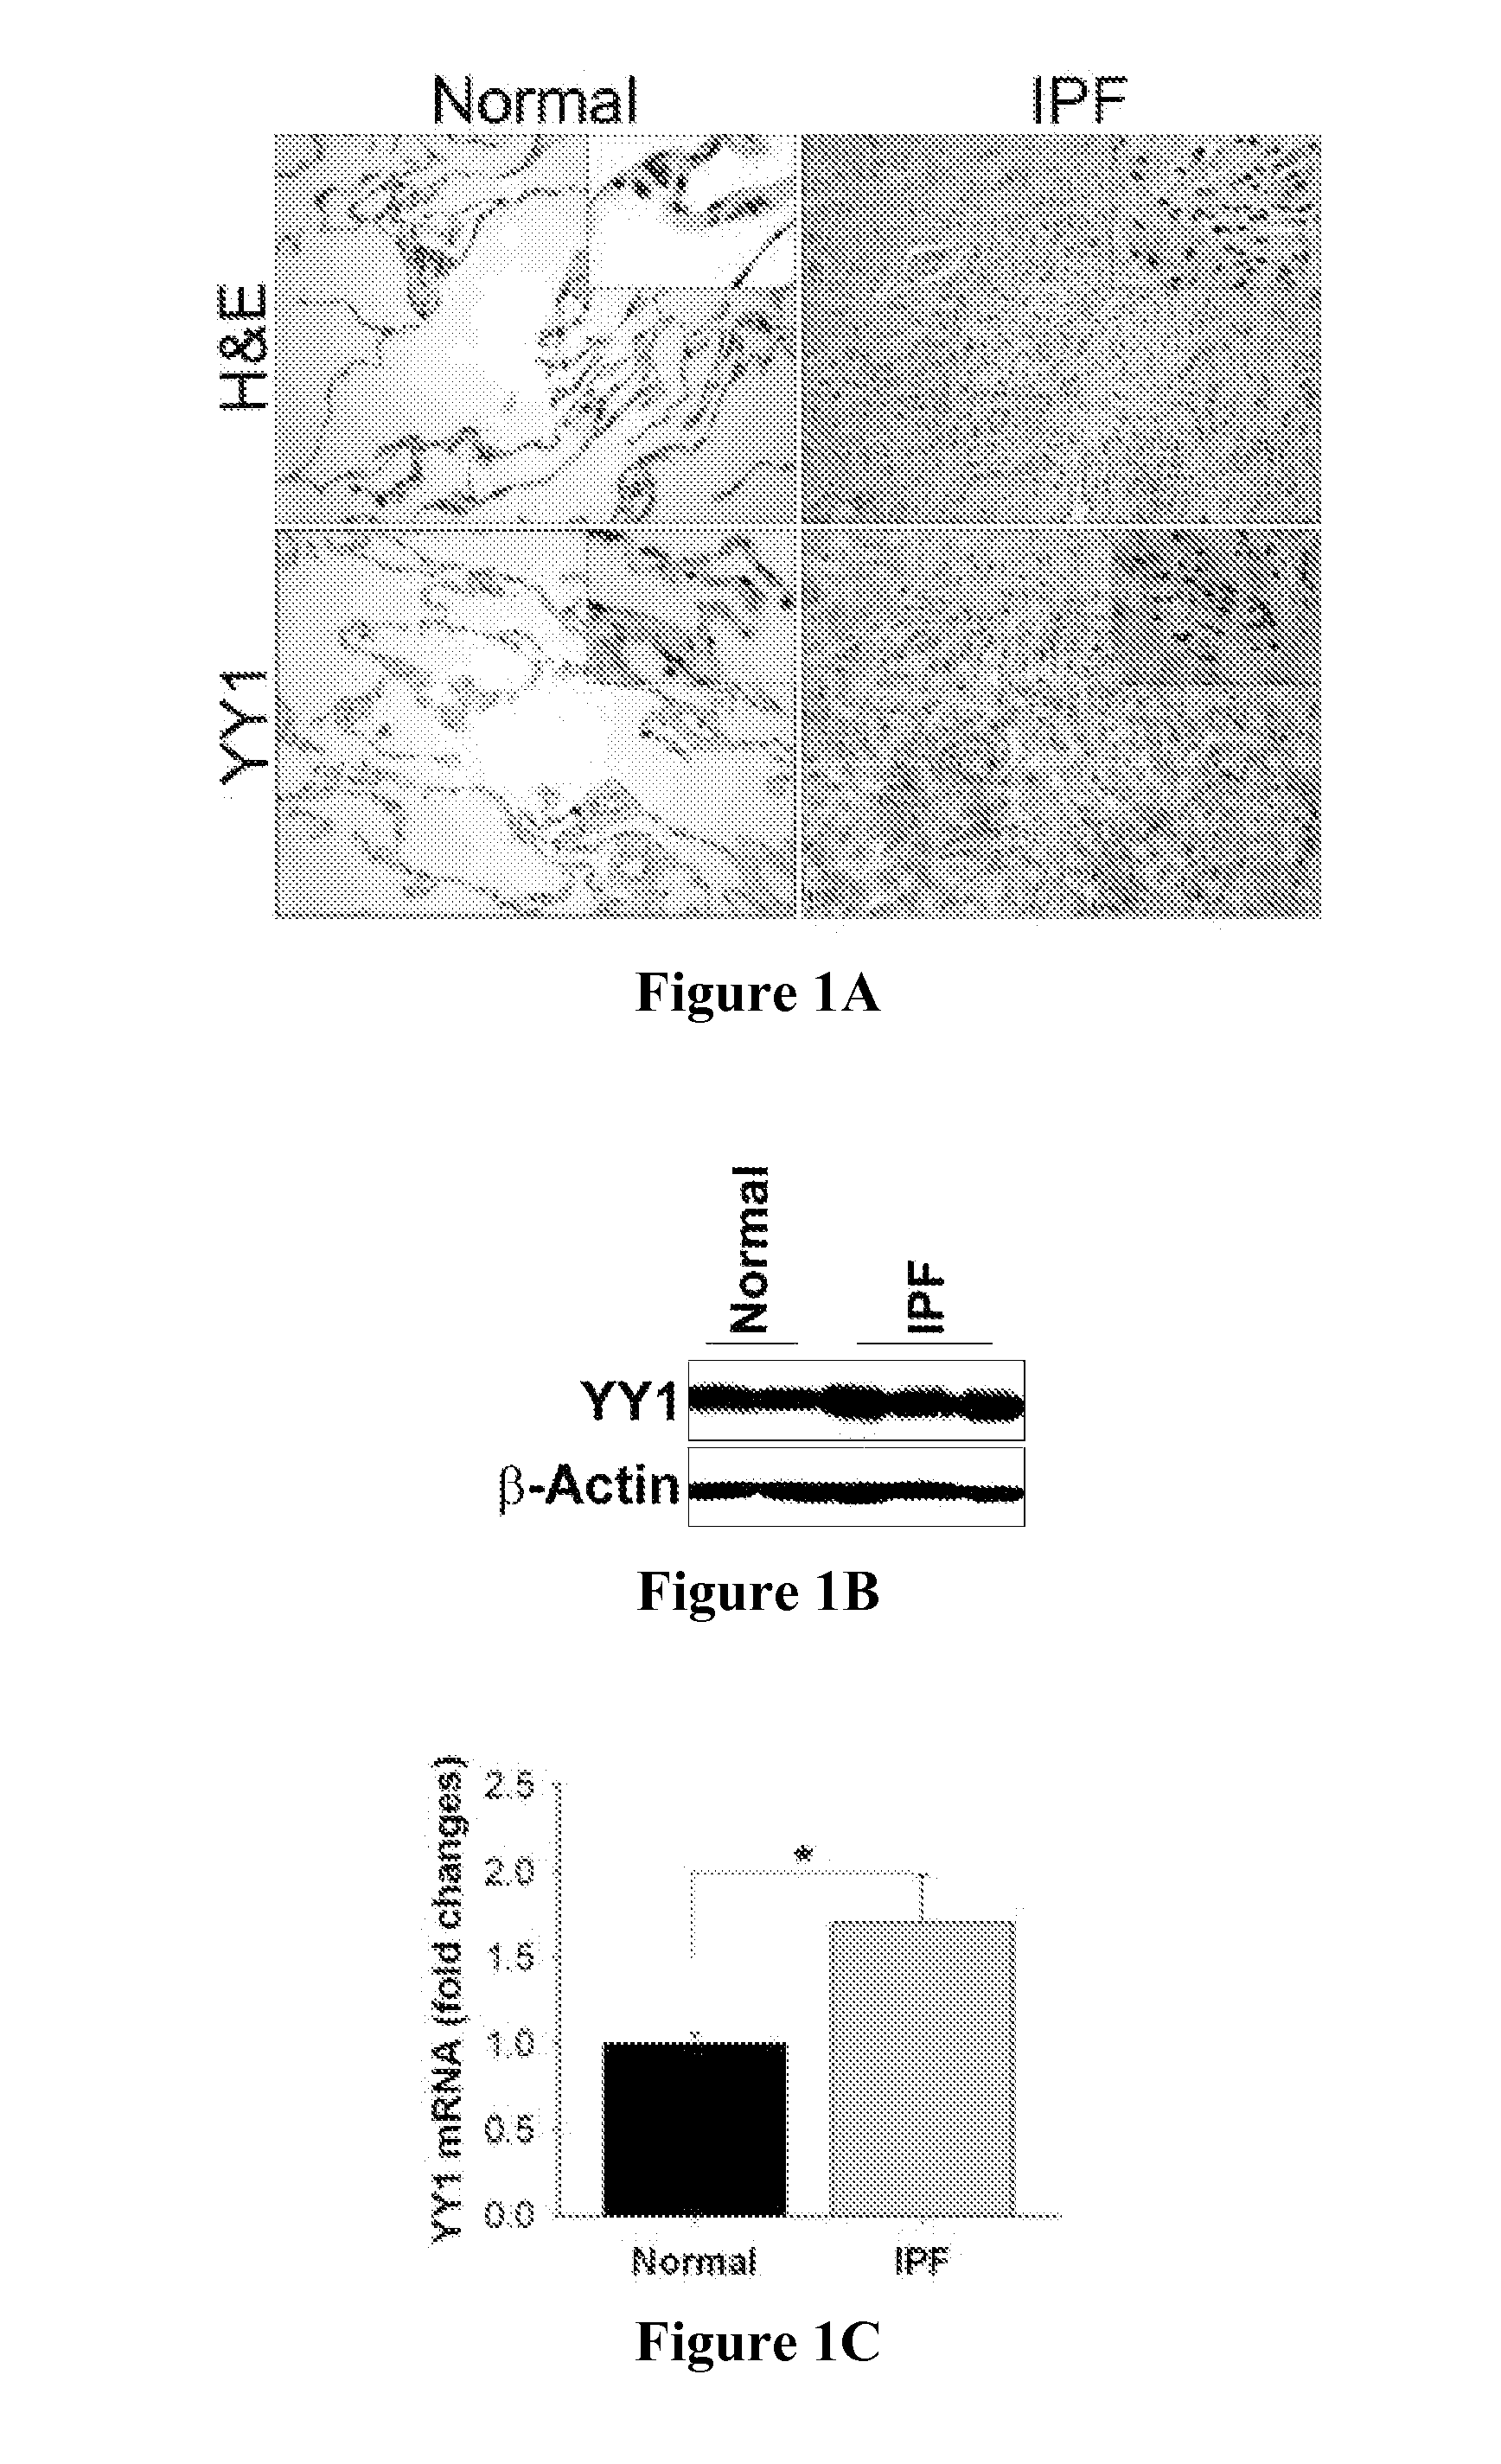 Methods of diagnosing and treating fibrosis